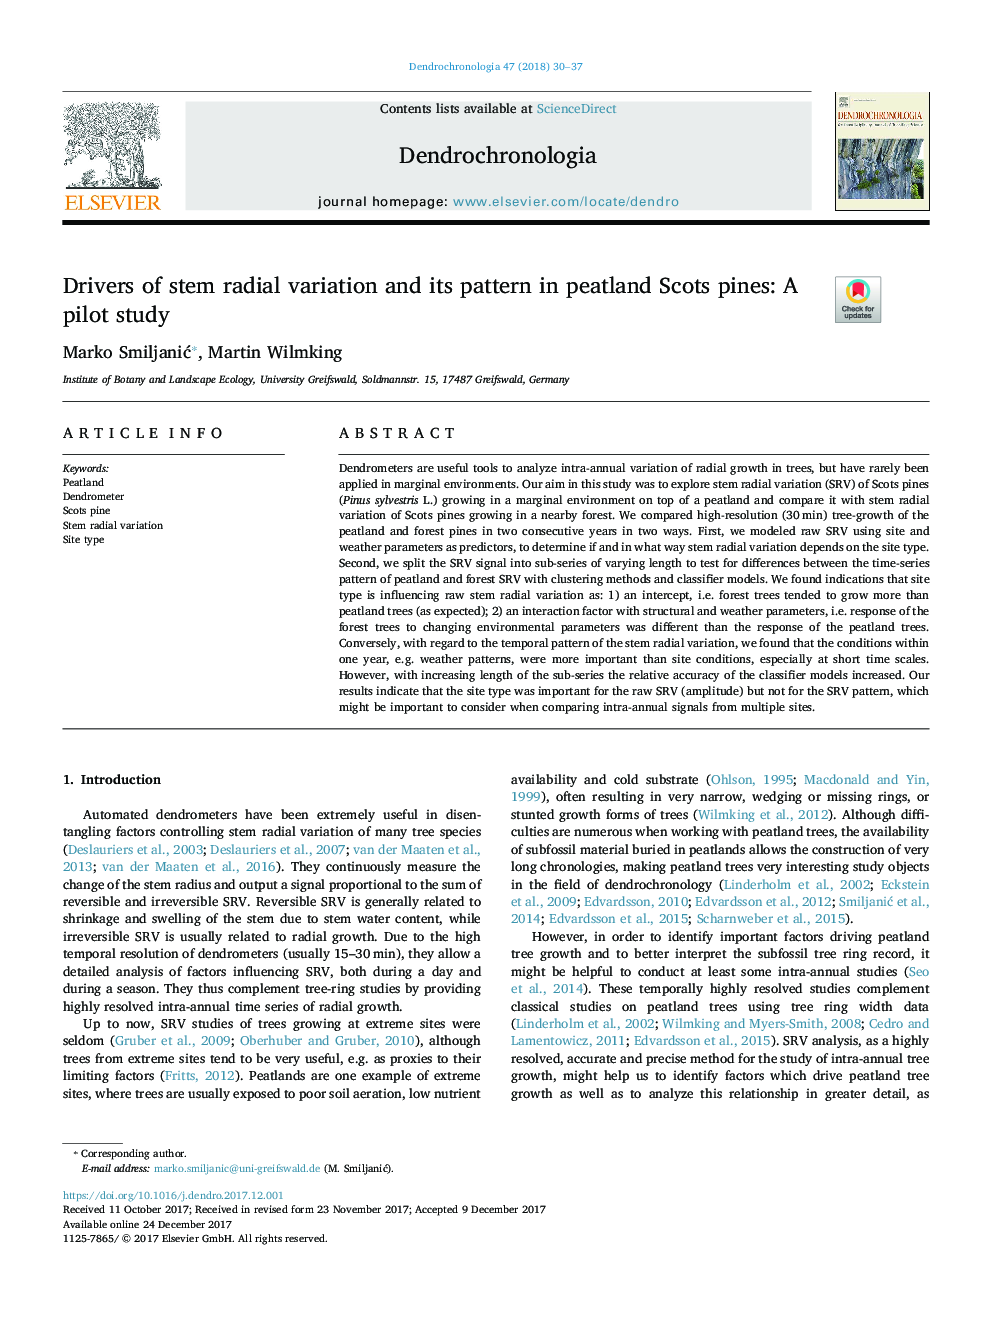 Drivers of stem radial variation and its pattern in peatland Scots pines: A pilot study